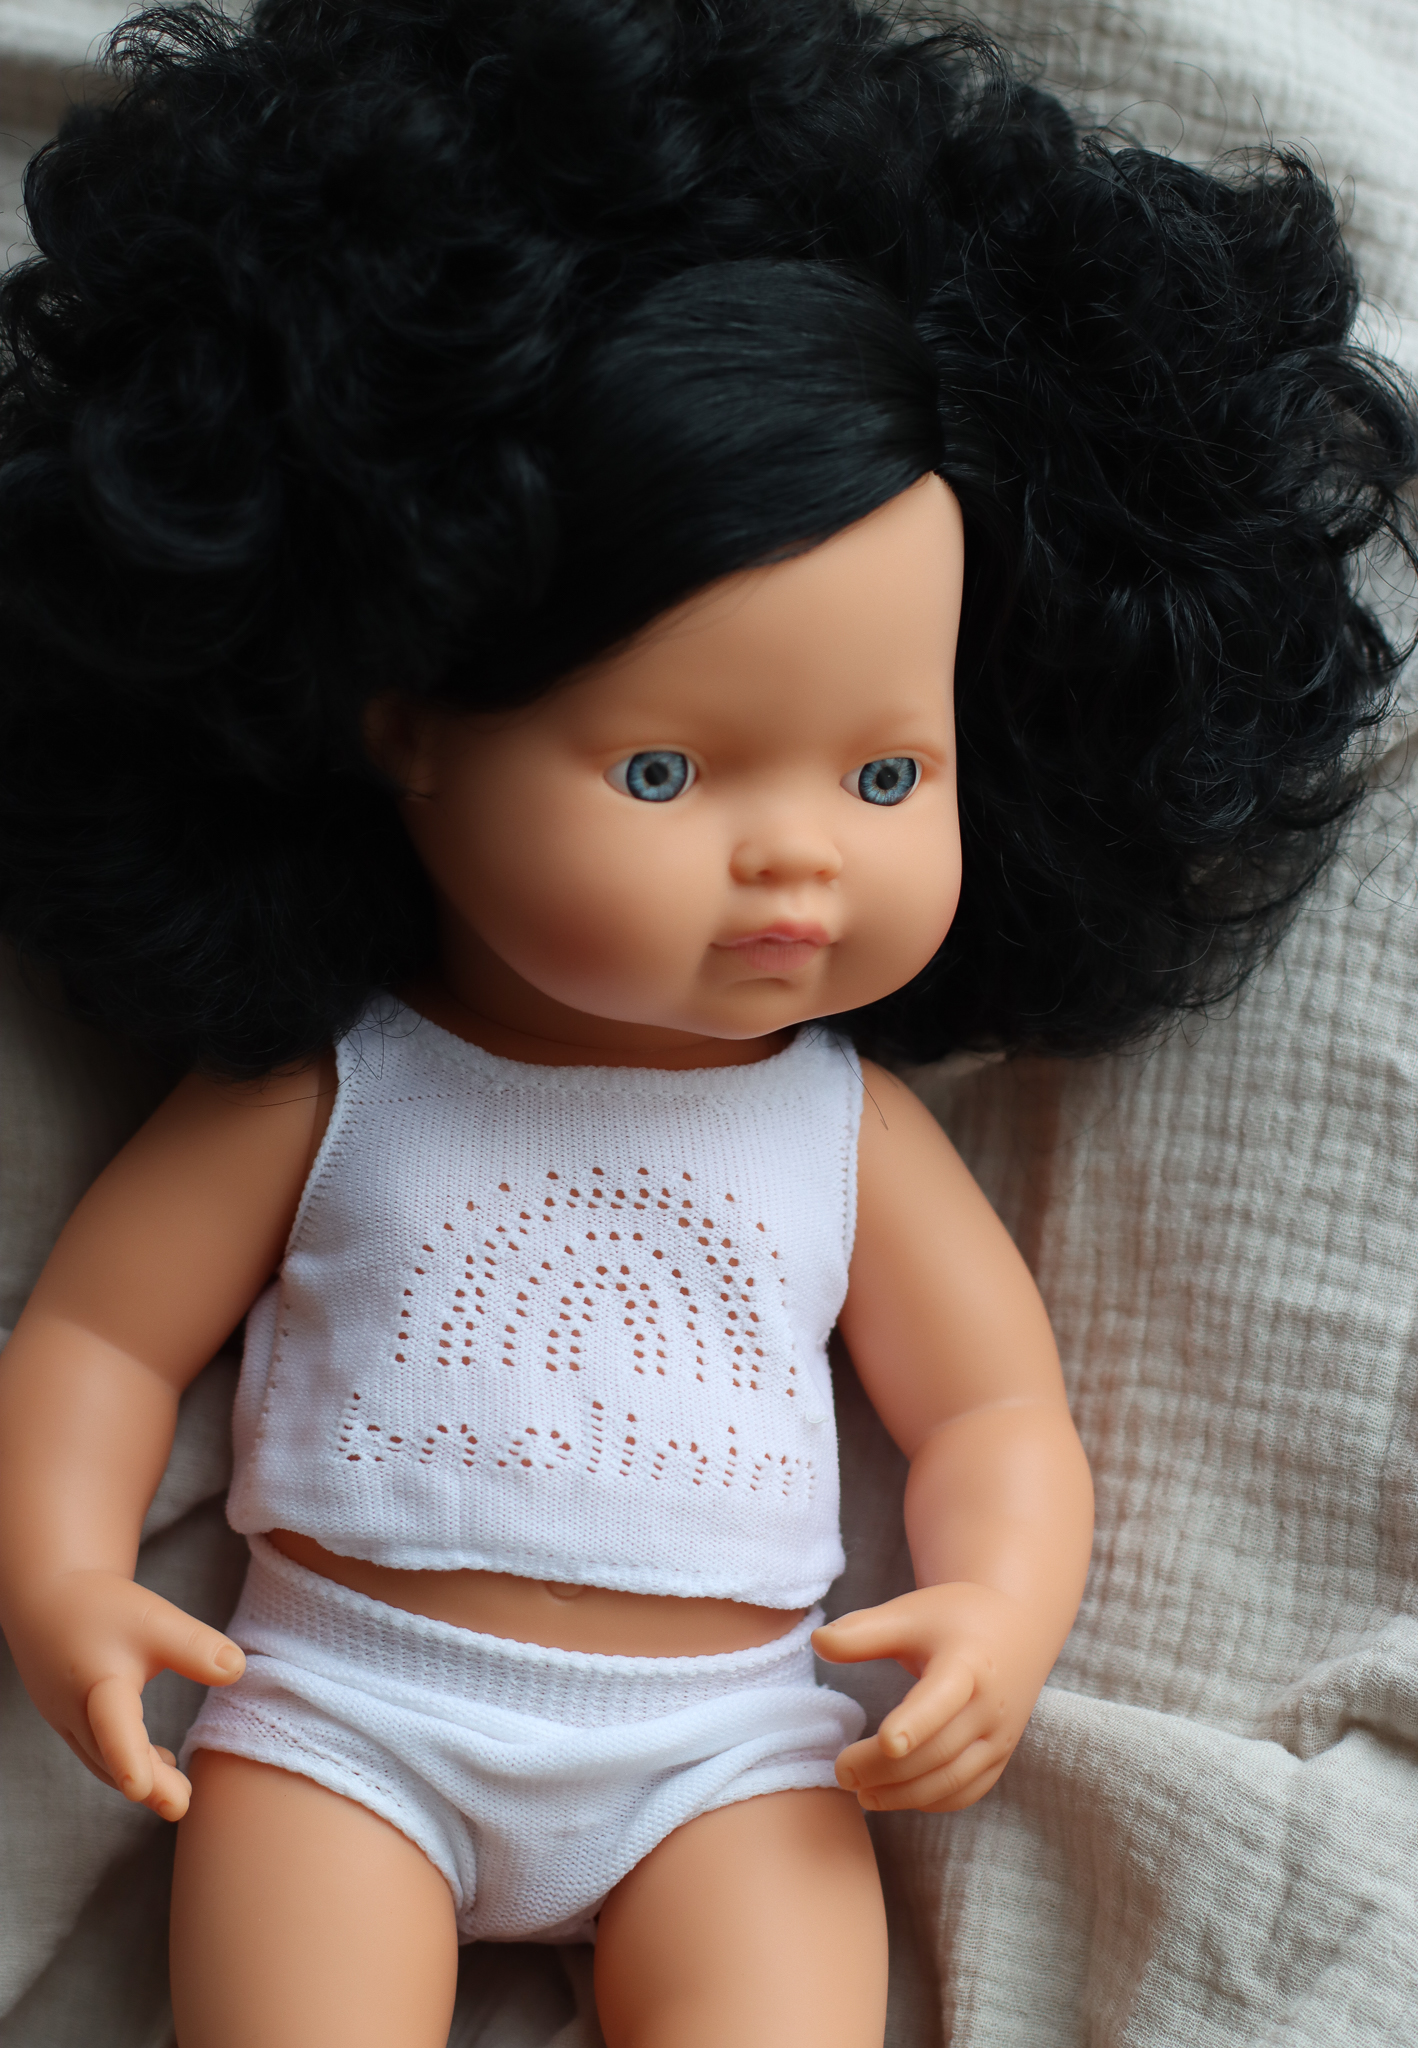 Baby doll caucasian girl with curly hair